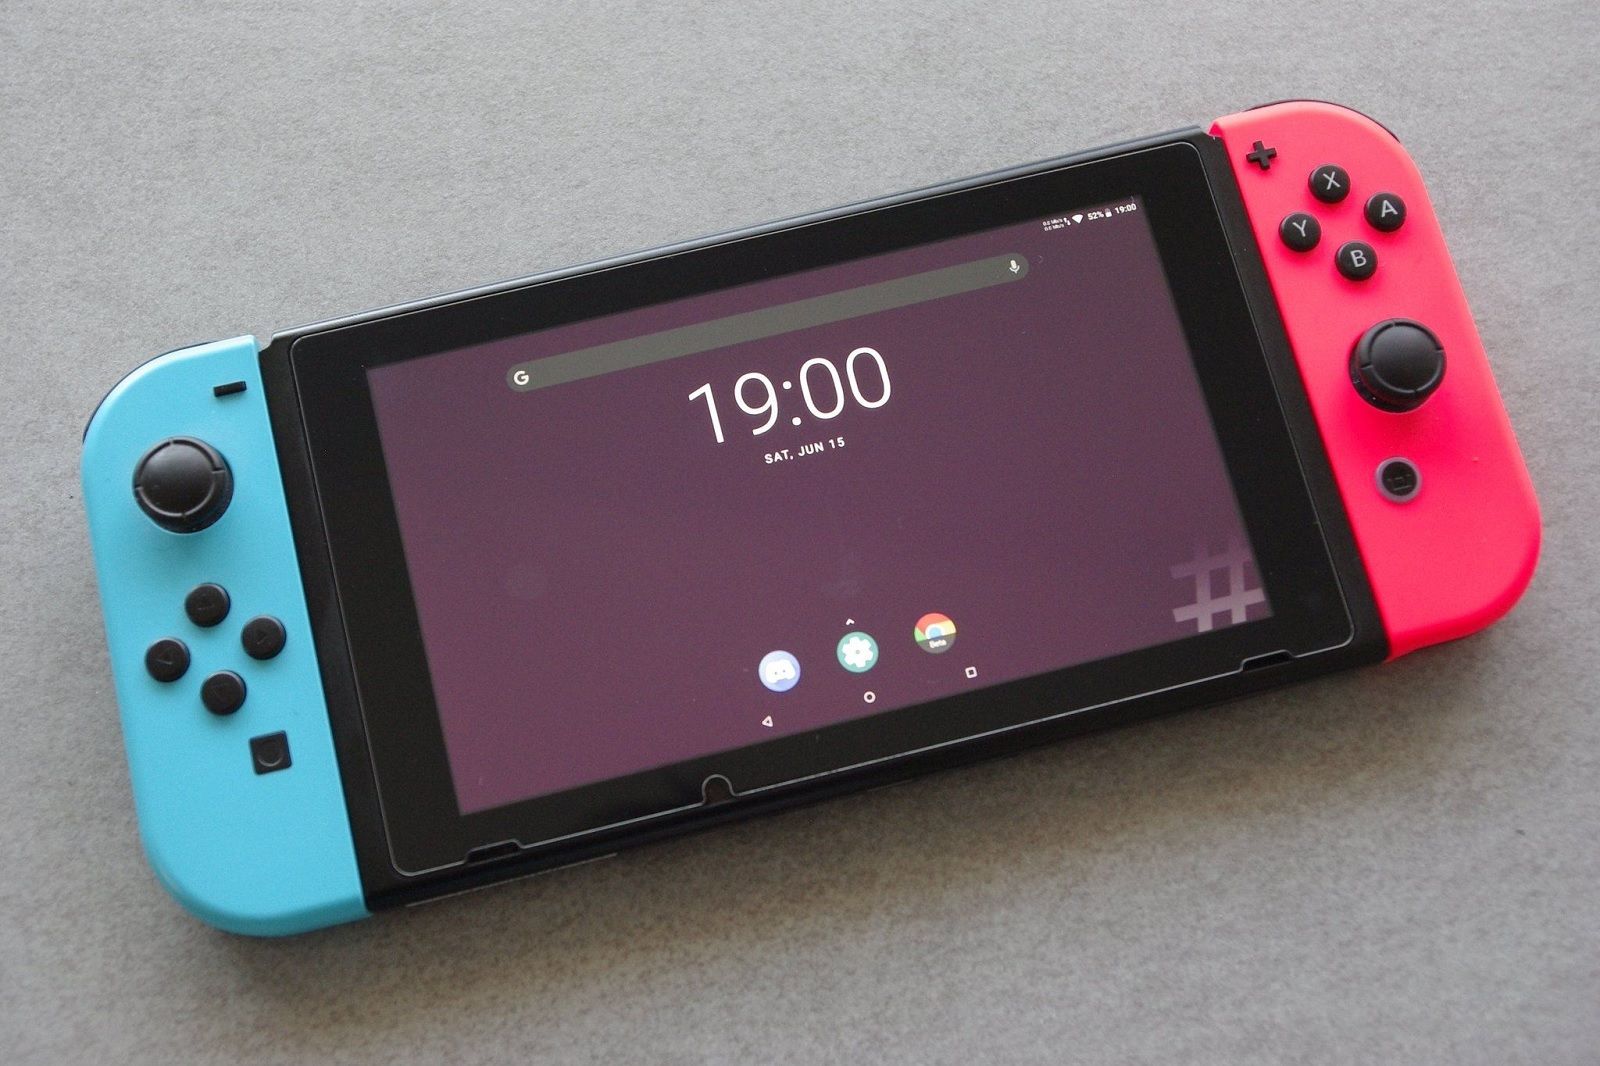 Android is unofficially available on Nintendo Switch image 1